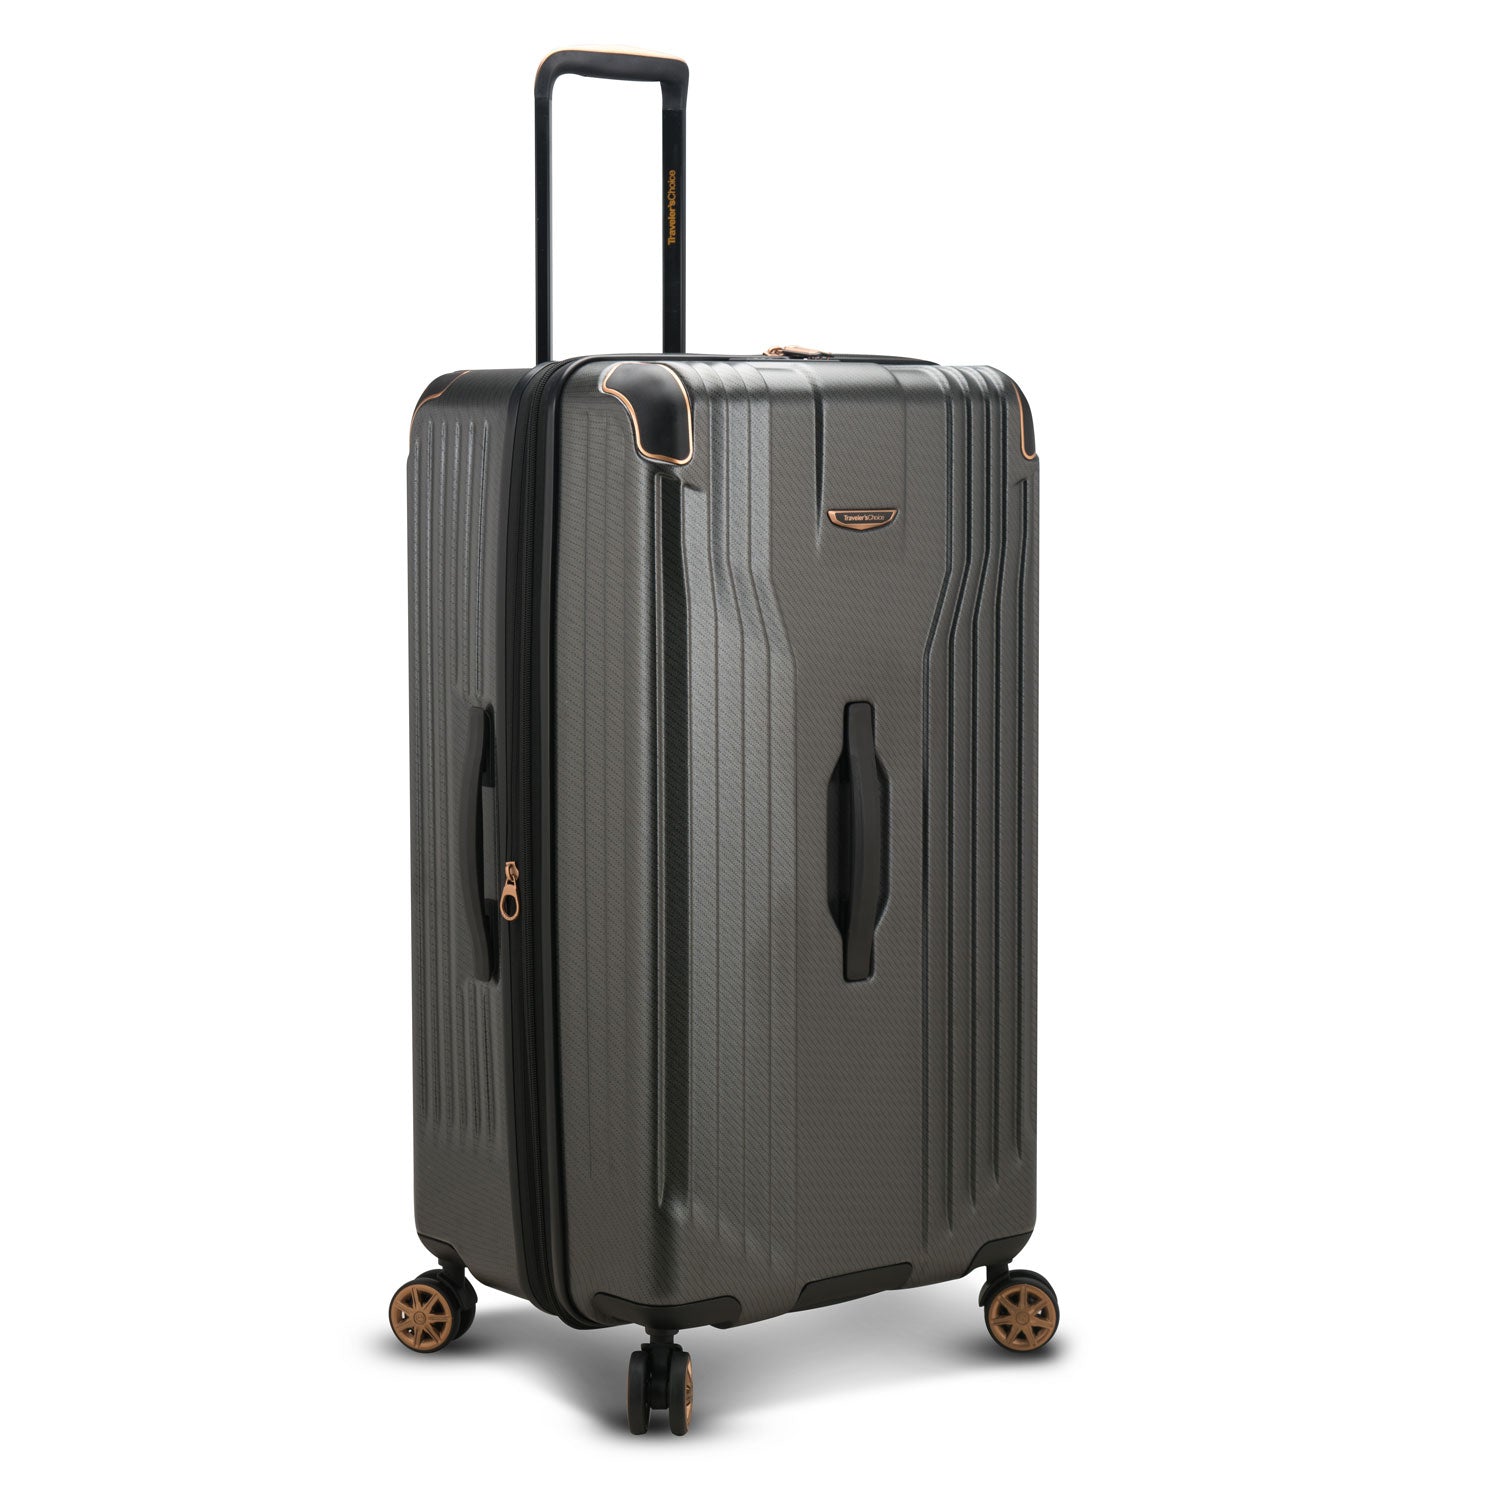 An image of the gray trunk luggage.